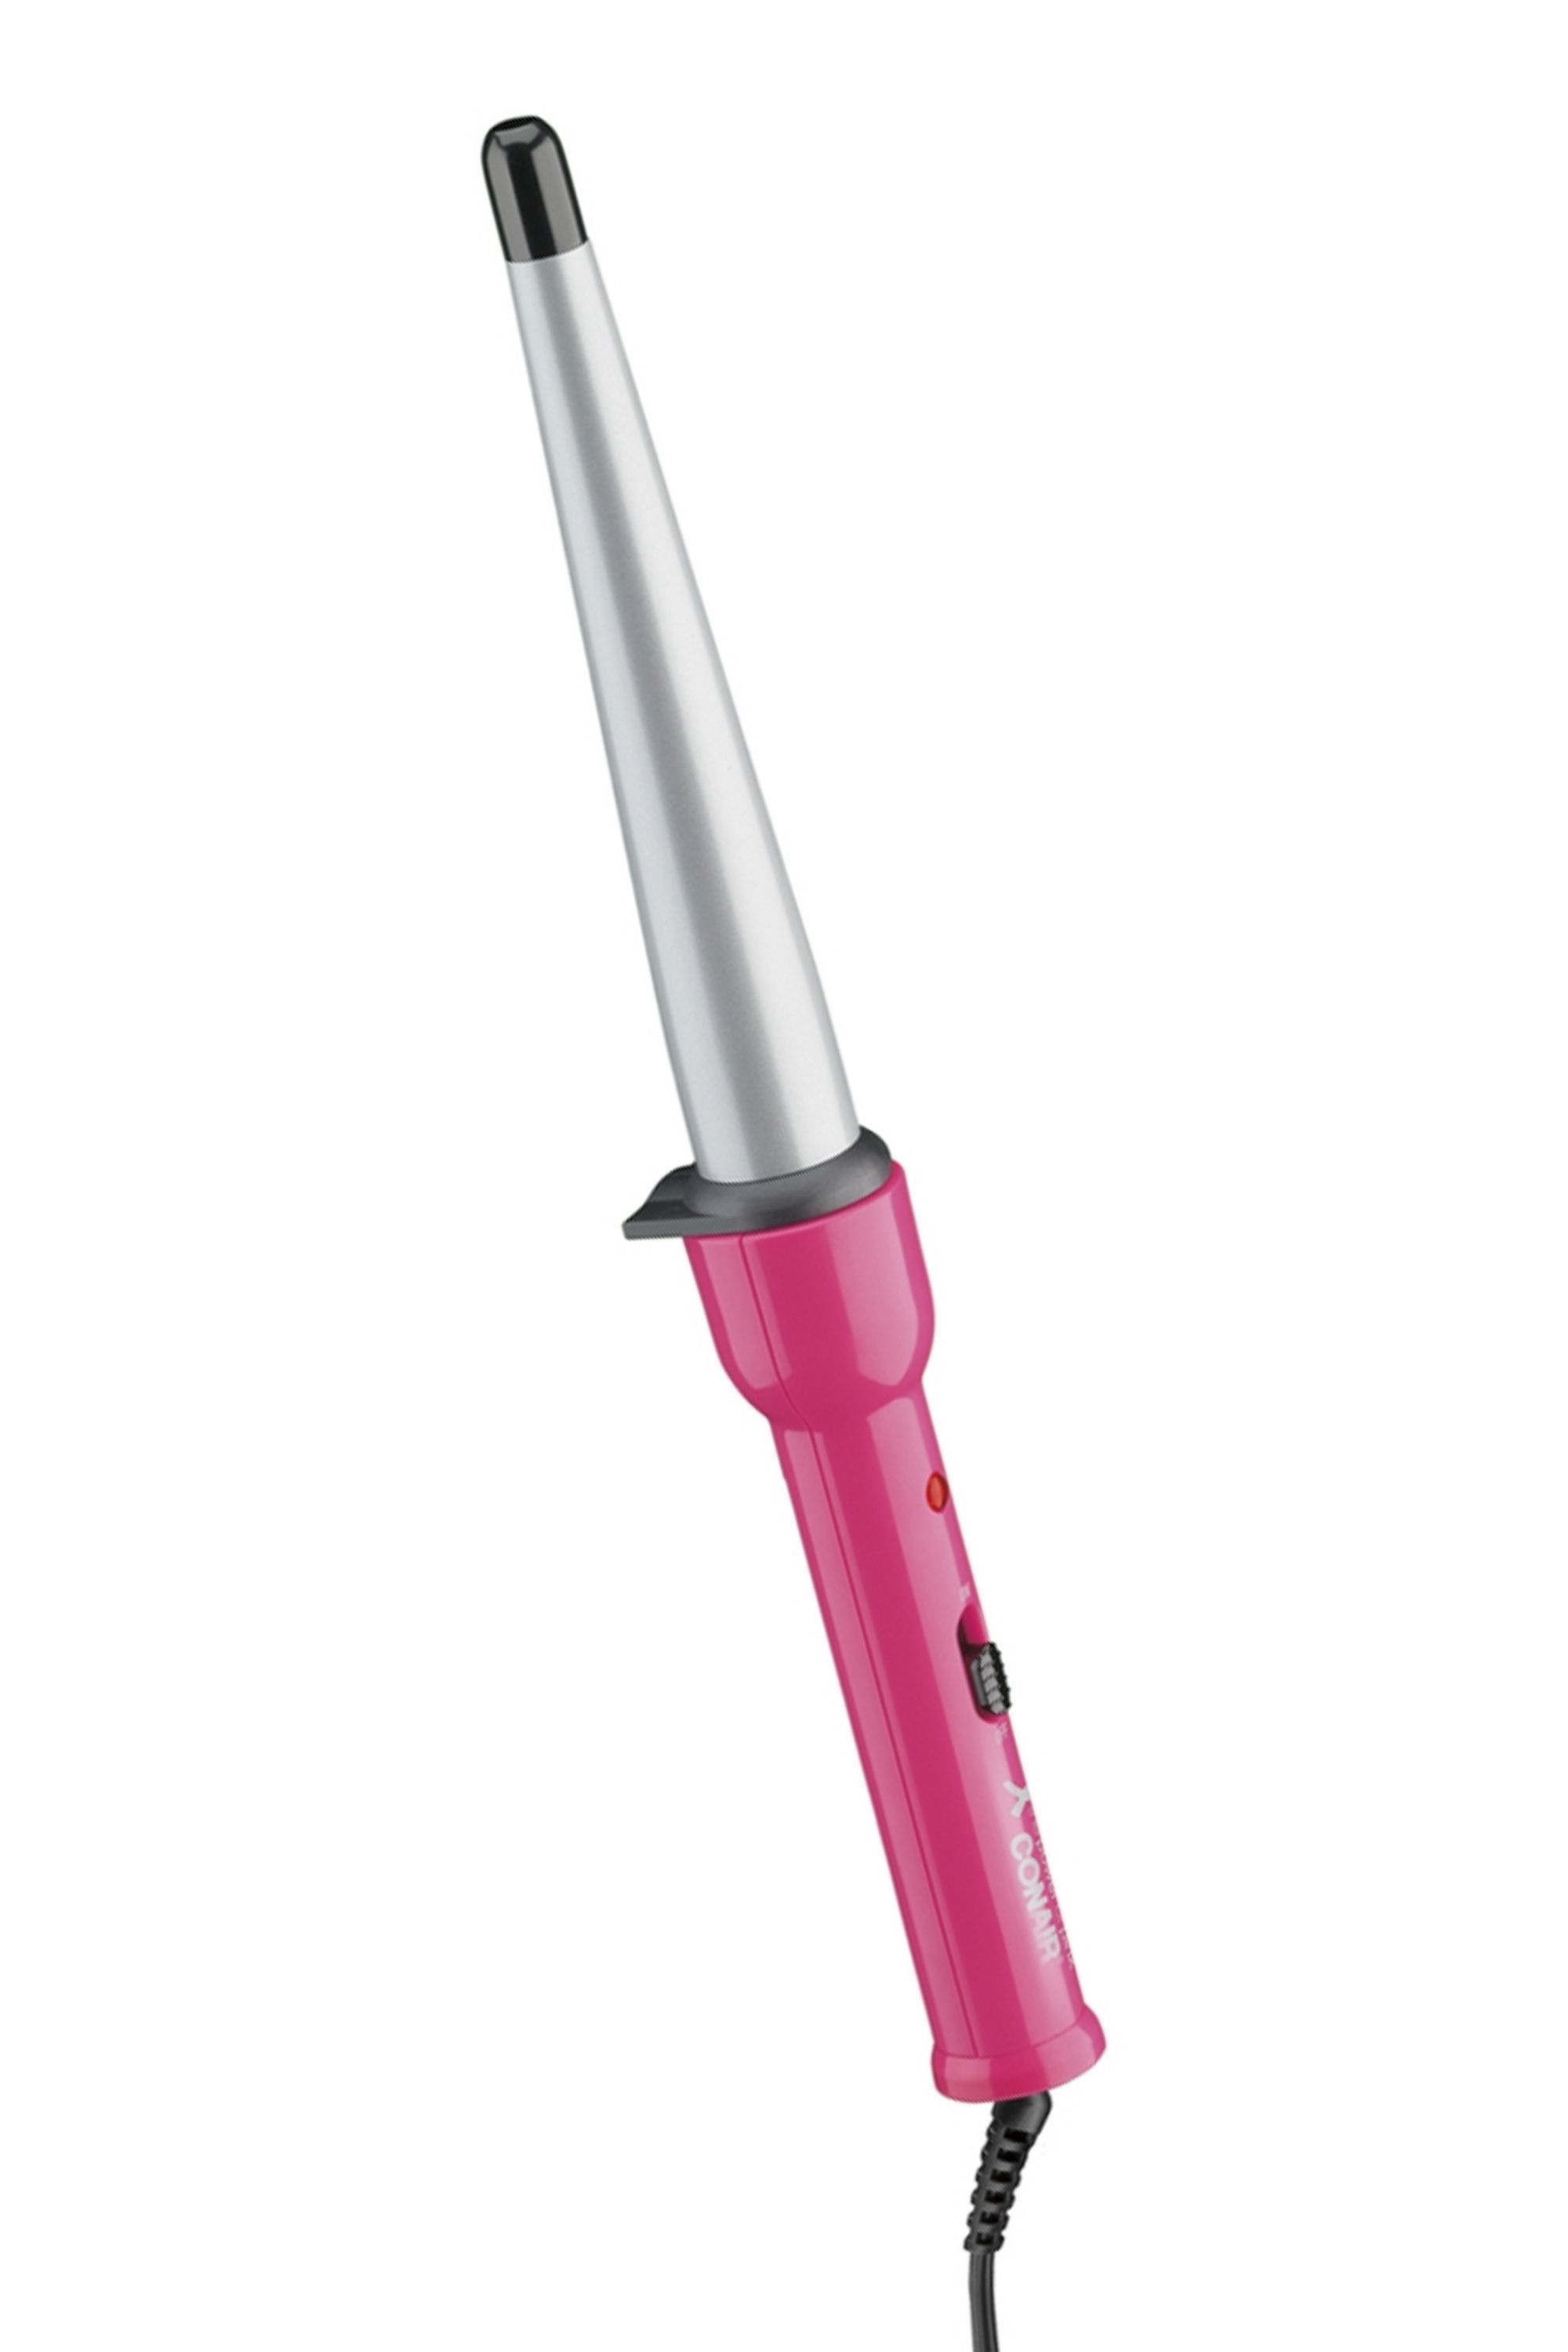 Best Curling Irons and Wands - 25 Best Curling Irons for Every Hair Type  and Budget